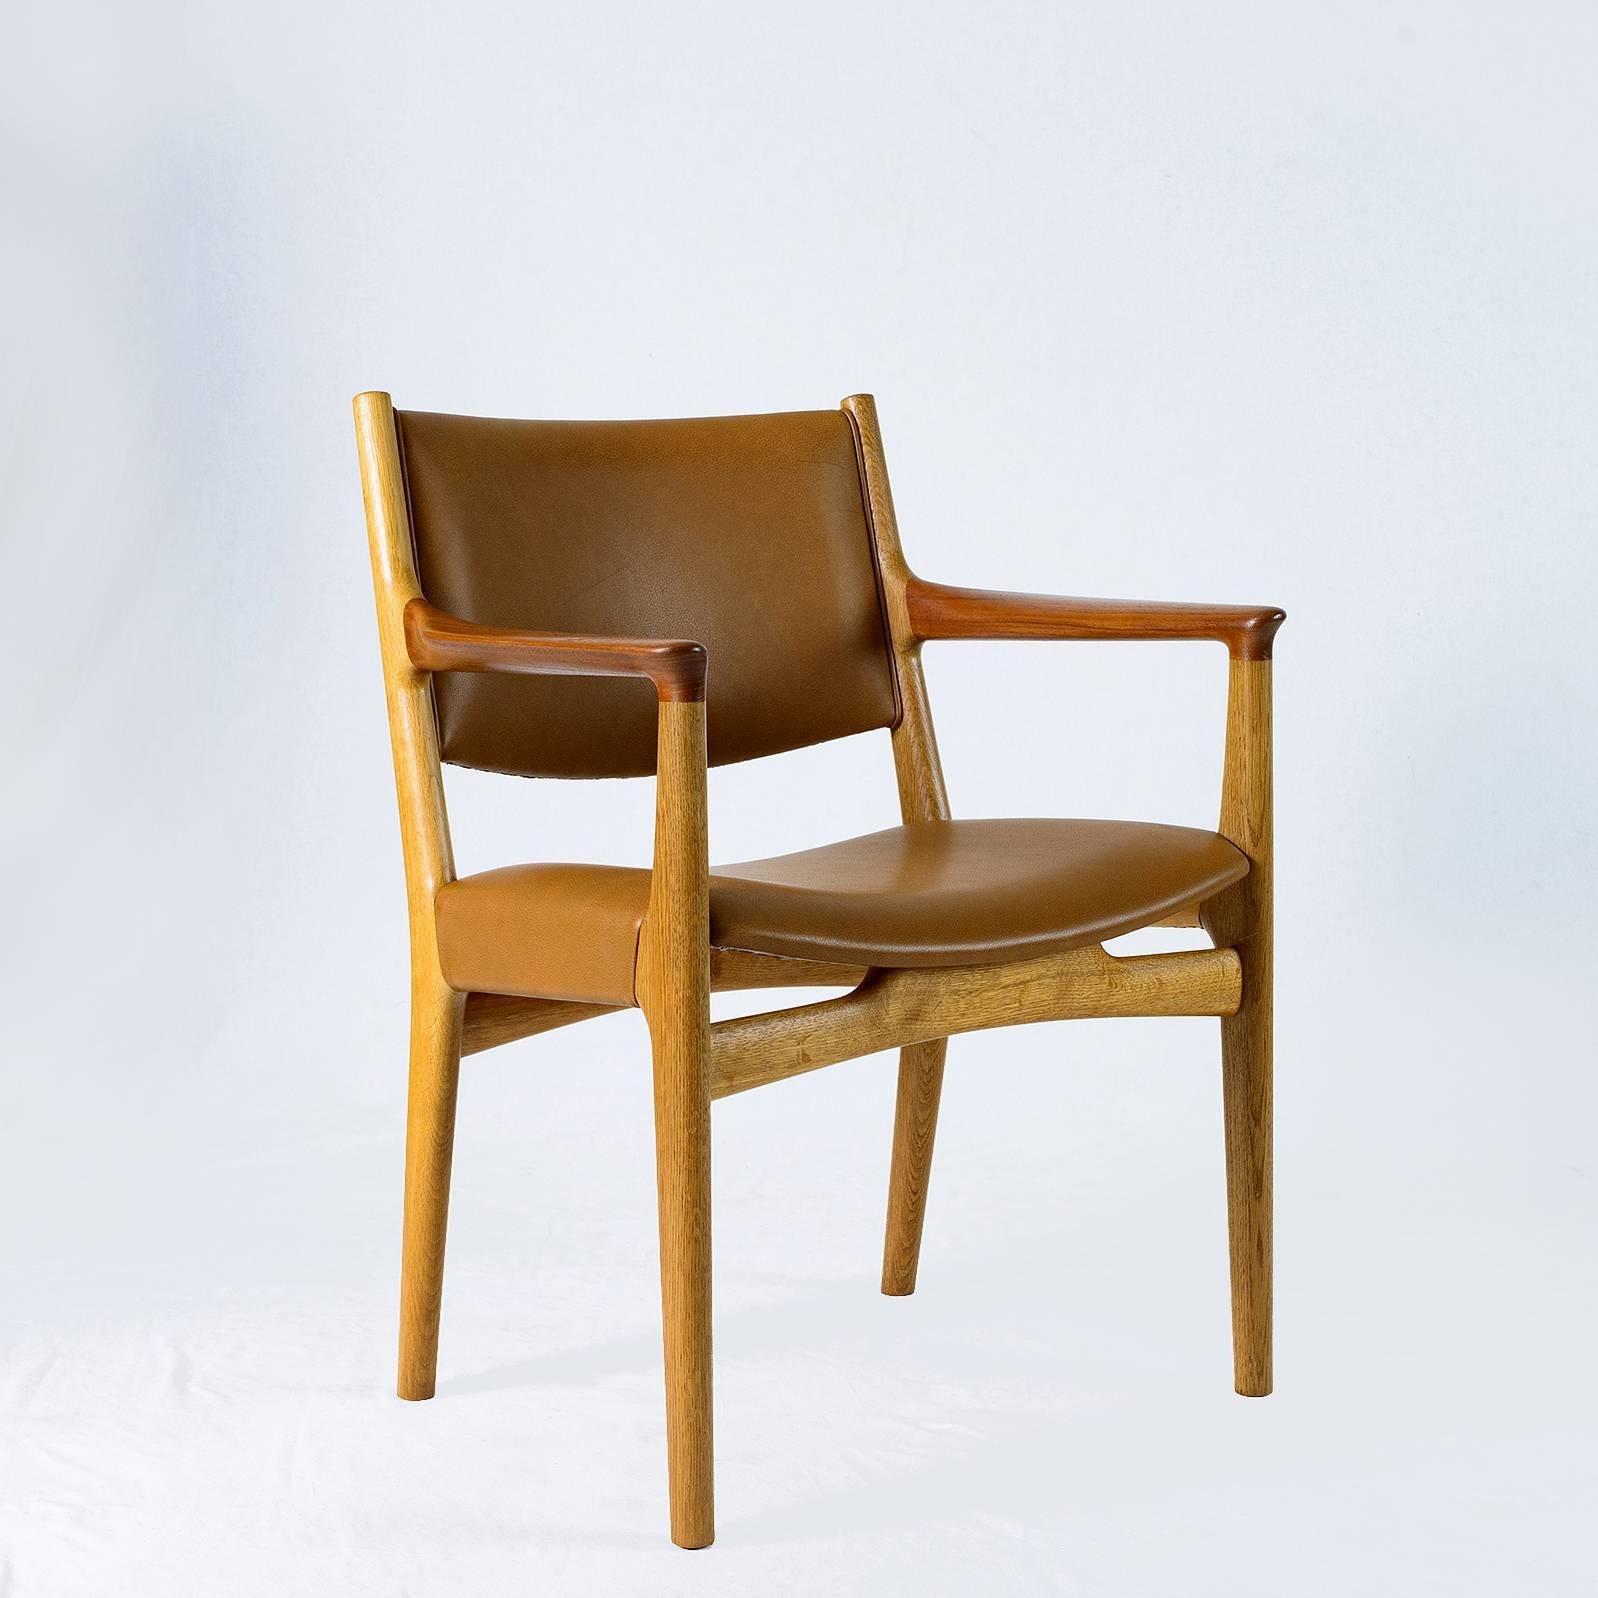 Pair of Hans Wegner JH-525 armchairs designed in 1959 and produced by Johannes Hansen. Note: I have two more in need of reupholstering.